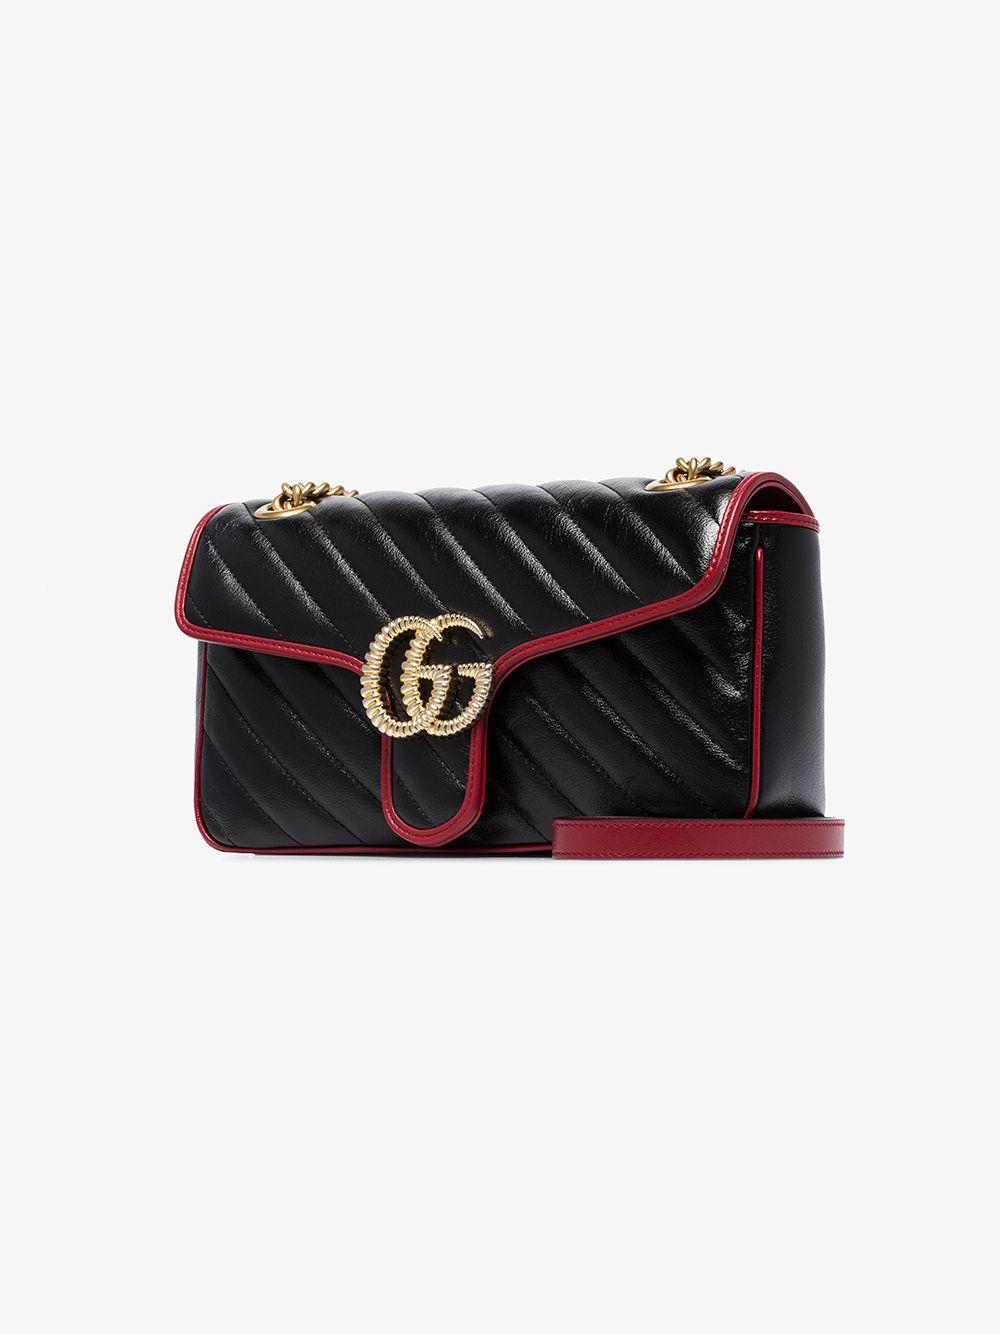 Gucci GG Marmont Camera Bag Matelasse Mini Hibiscus Red in Leather